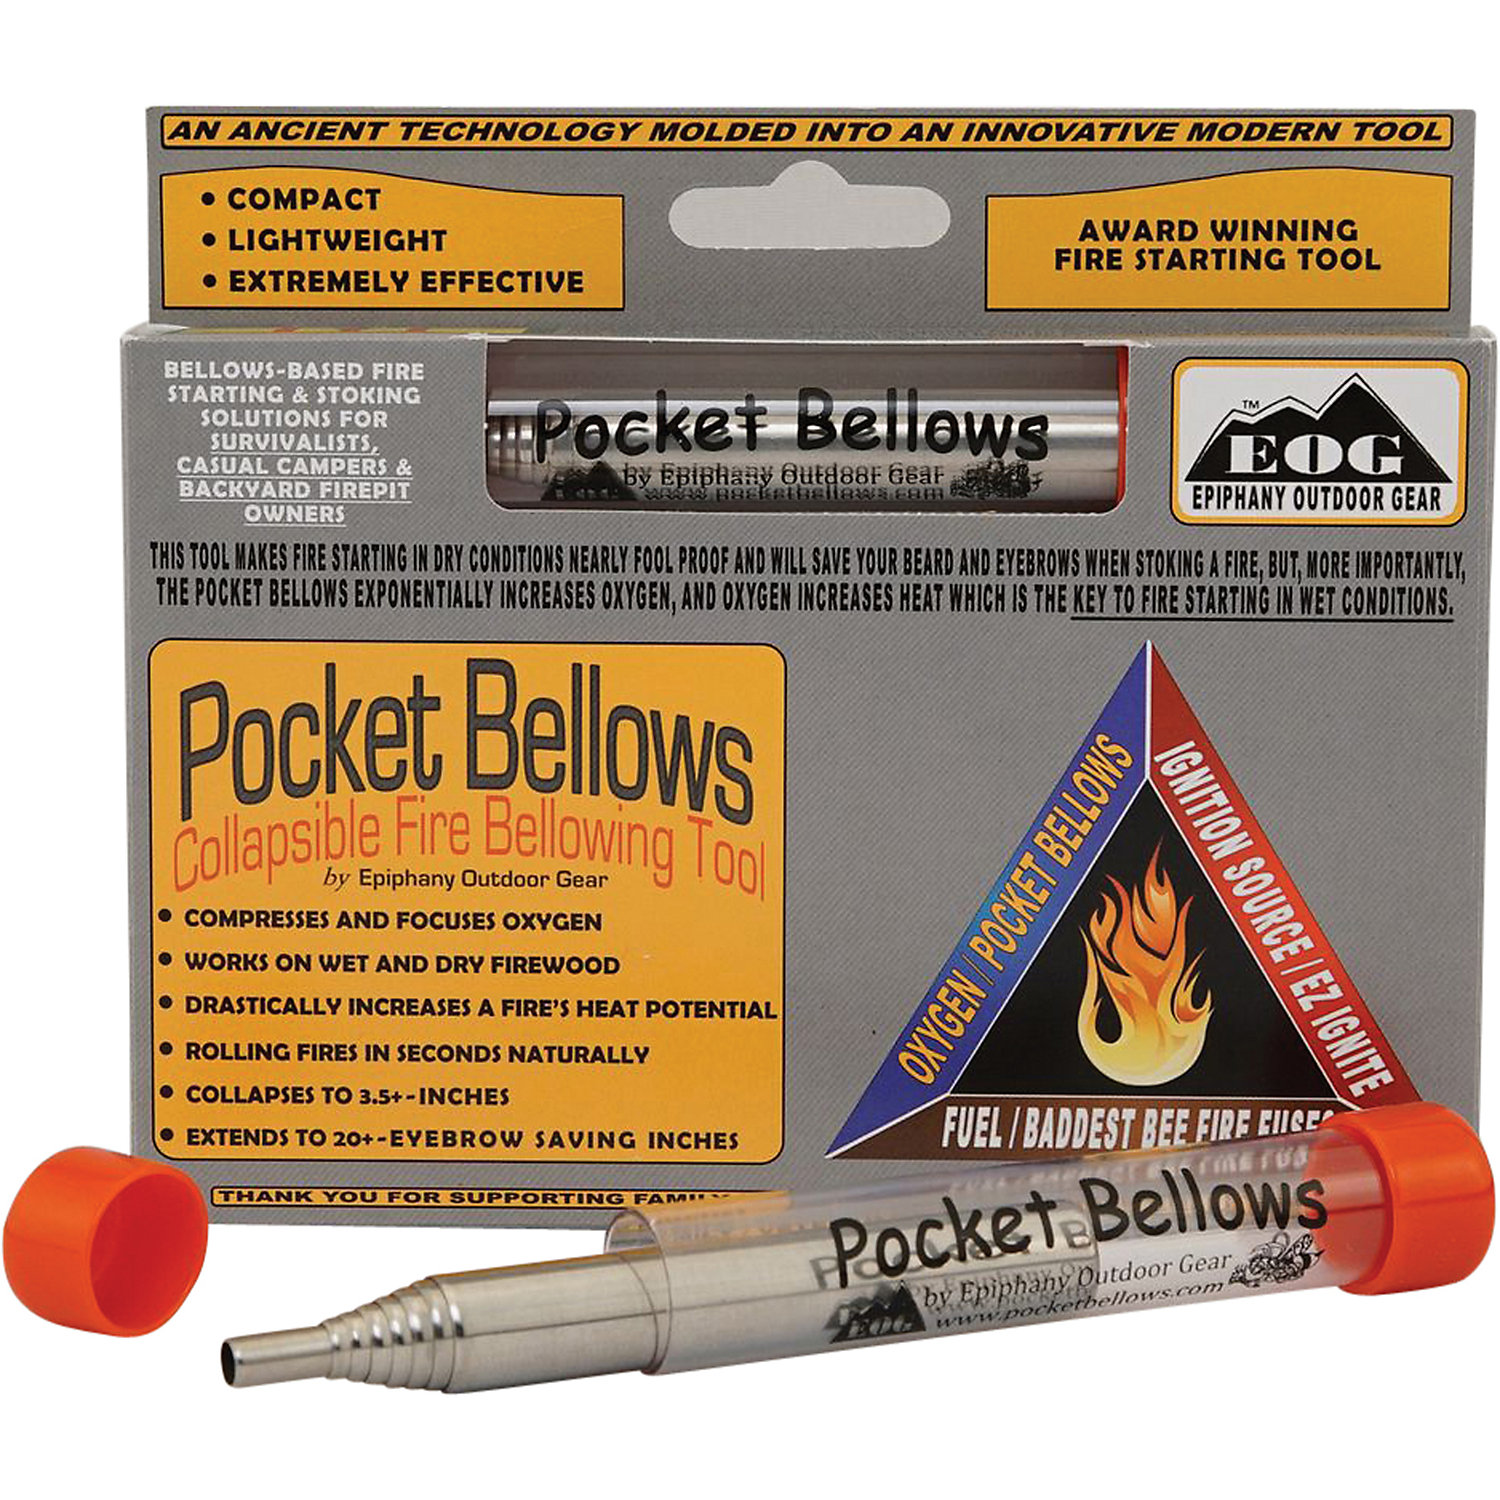 Pocket Bellows Collapsible Fire Bellowing Tool 